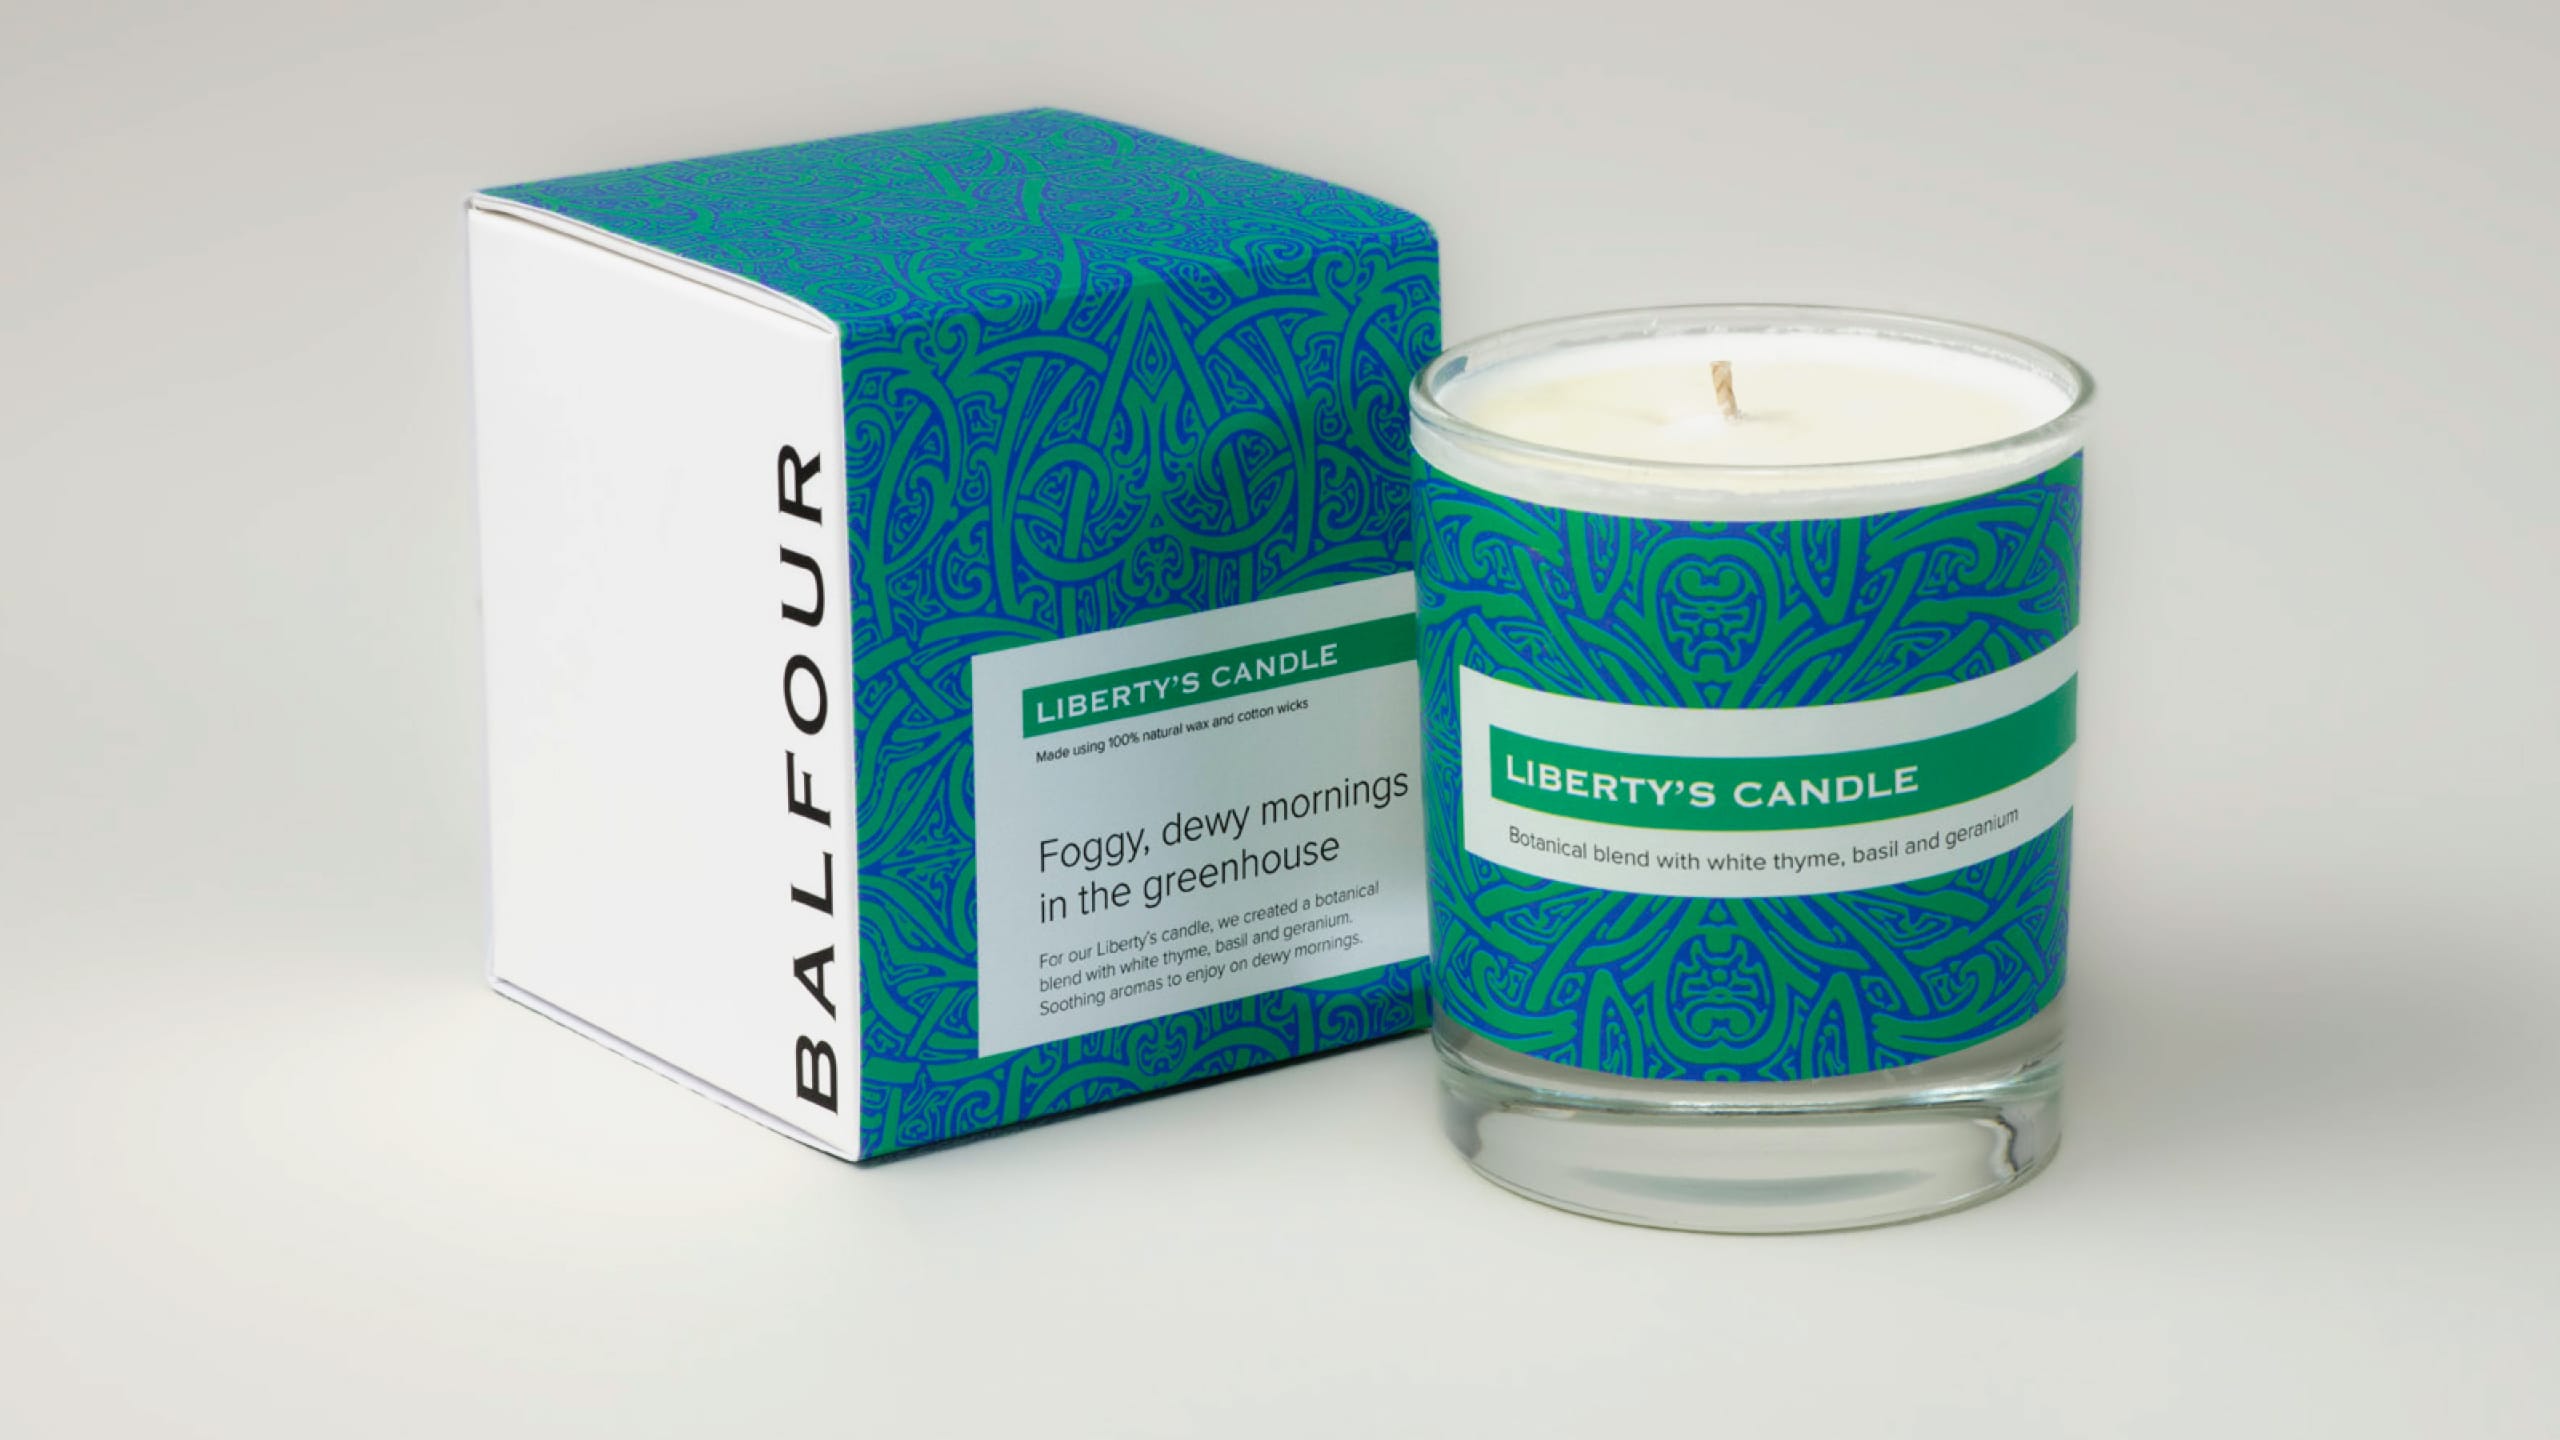 Balfour Winery Candle Packaging, Website design and development